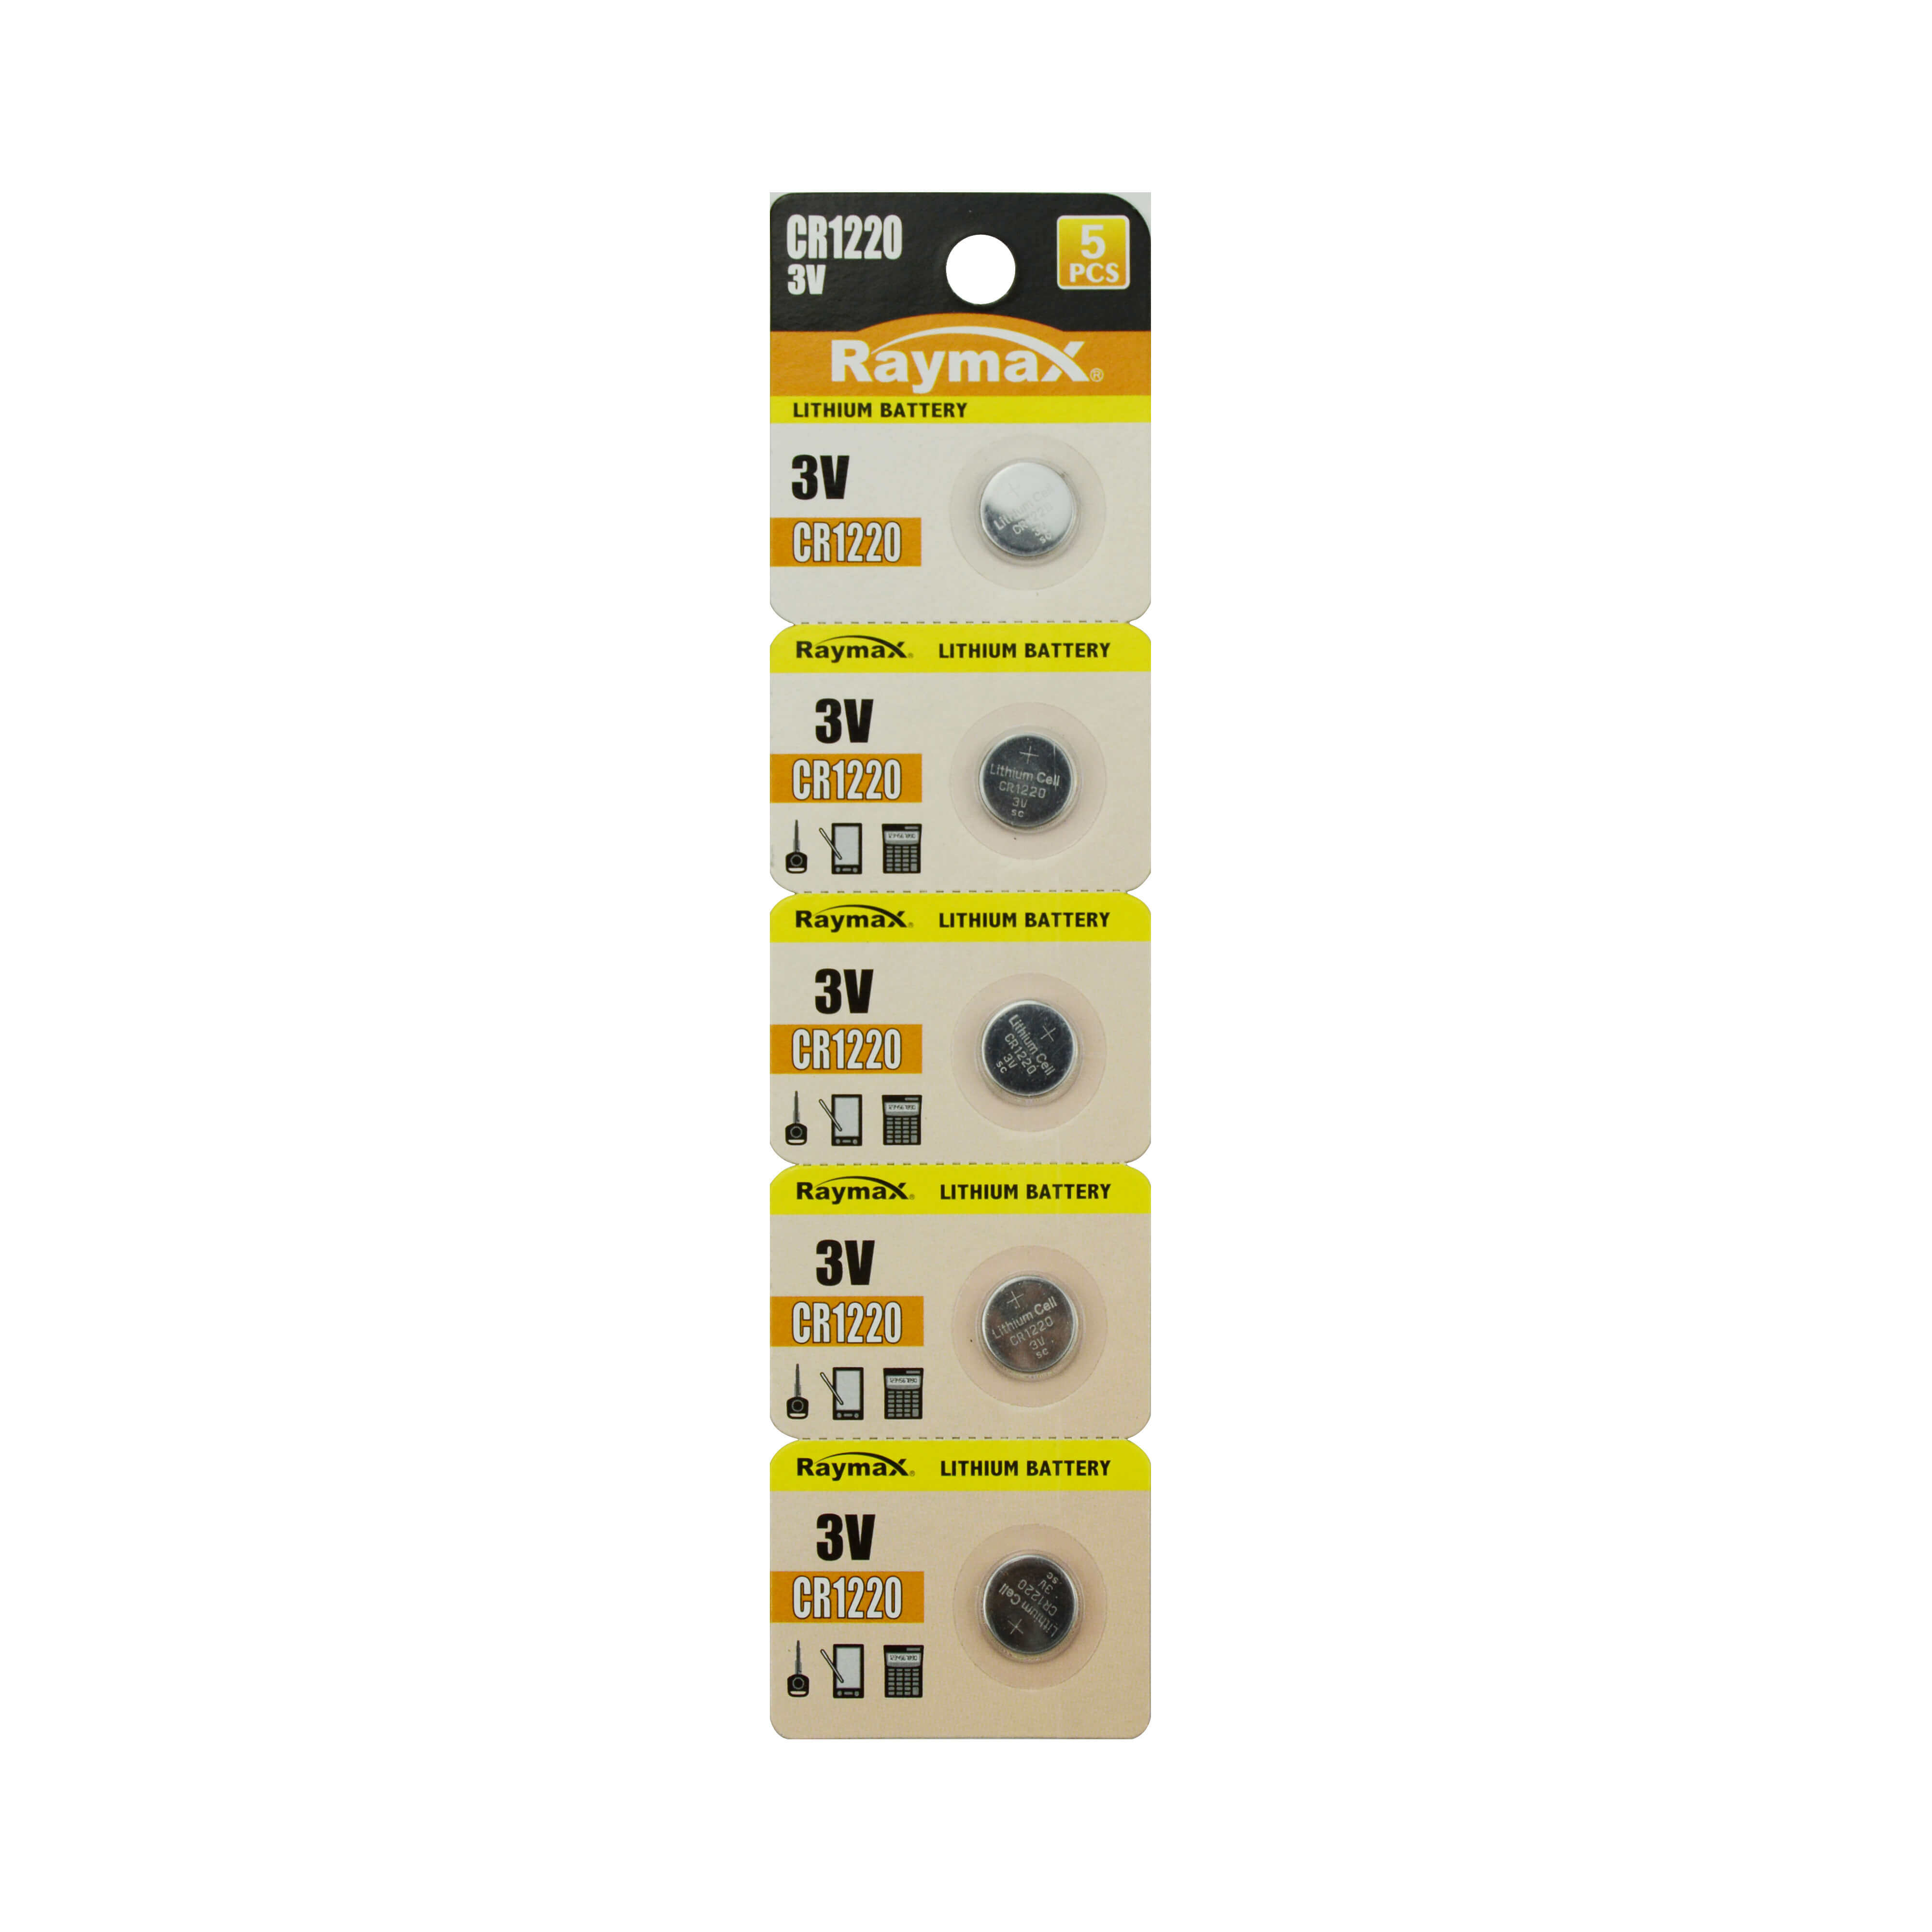 Raymax lithium button cell battery CR1220 5-pack